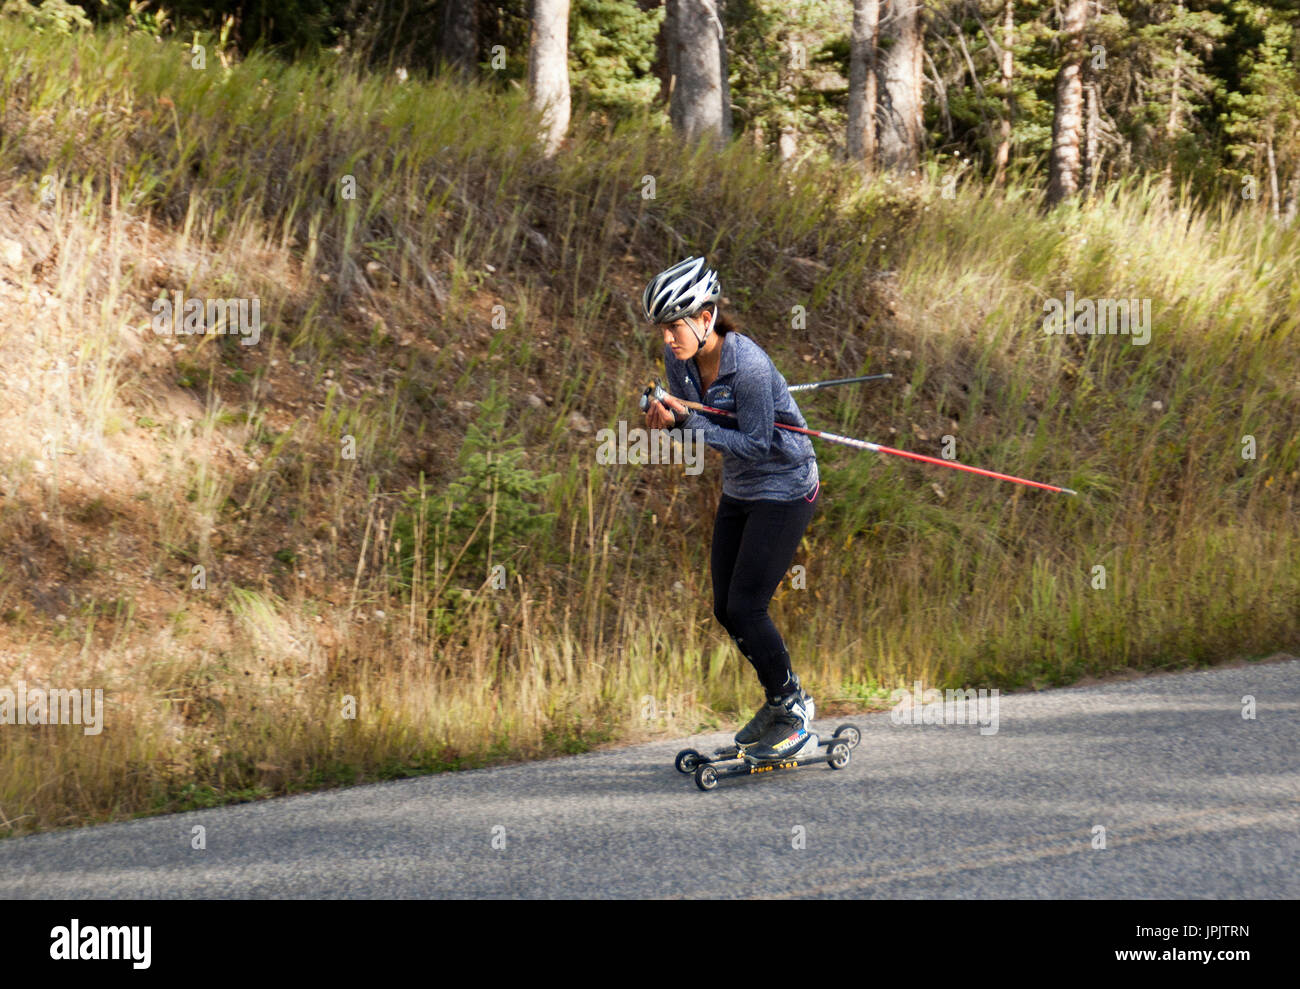 training for snow skiing on the highway in Montana Stock Photo